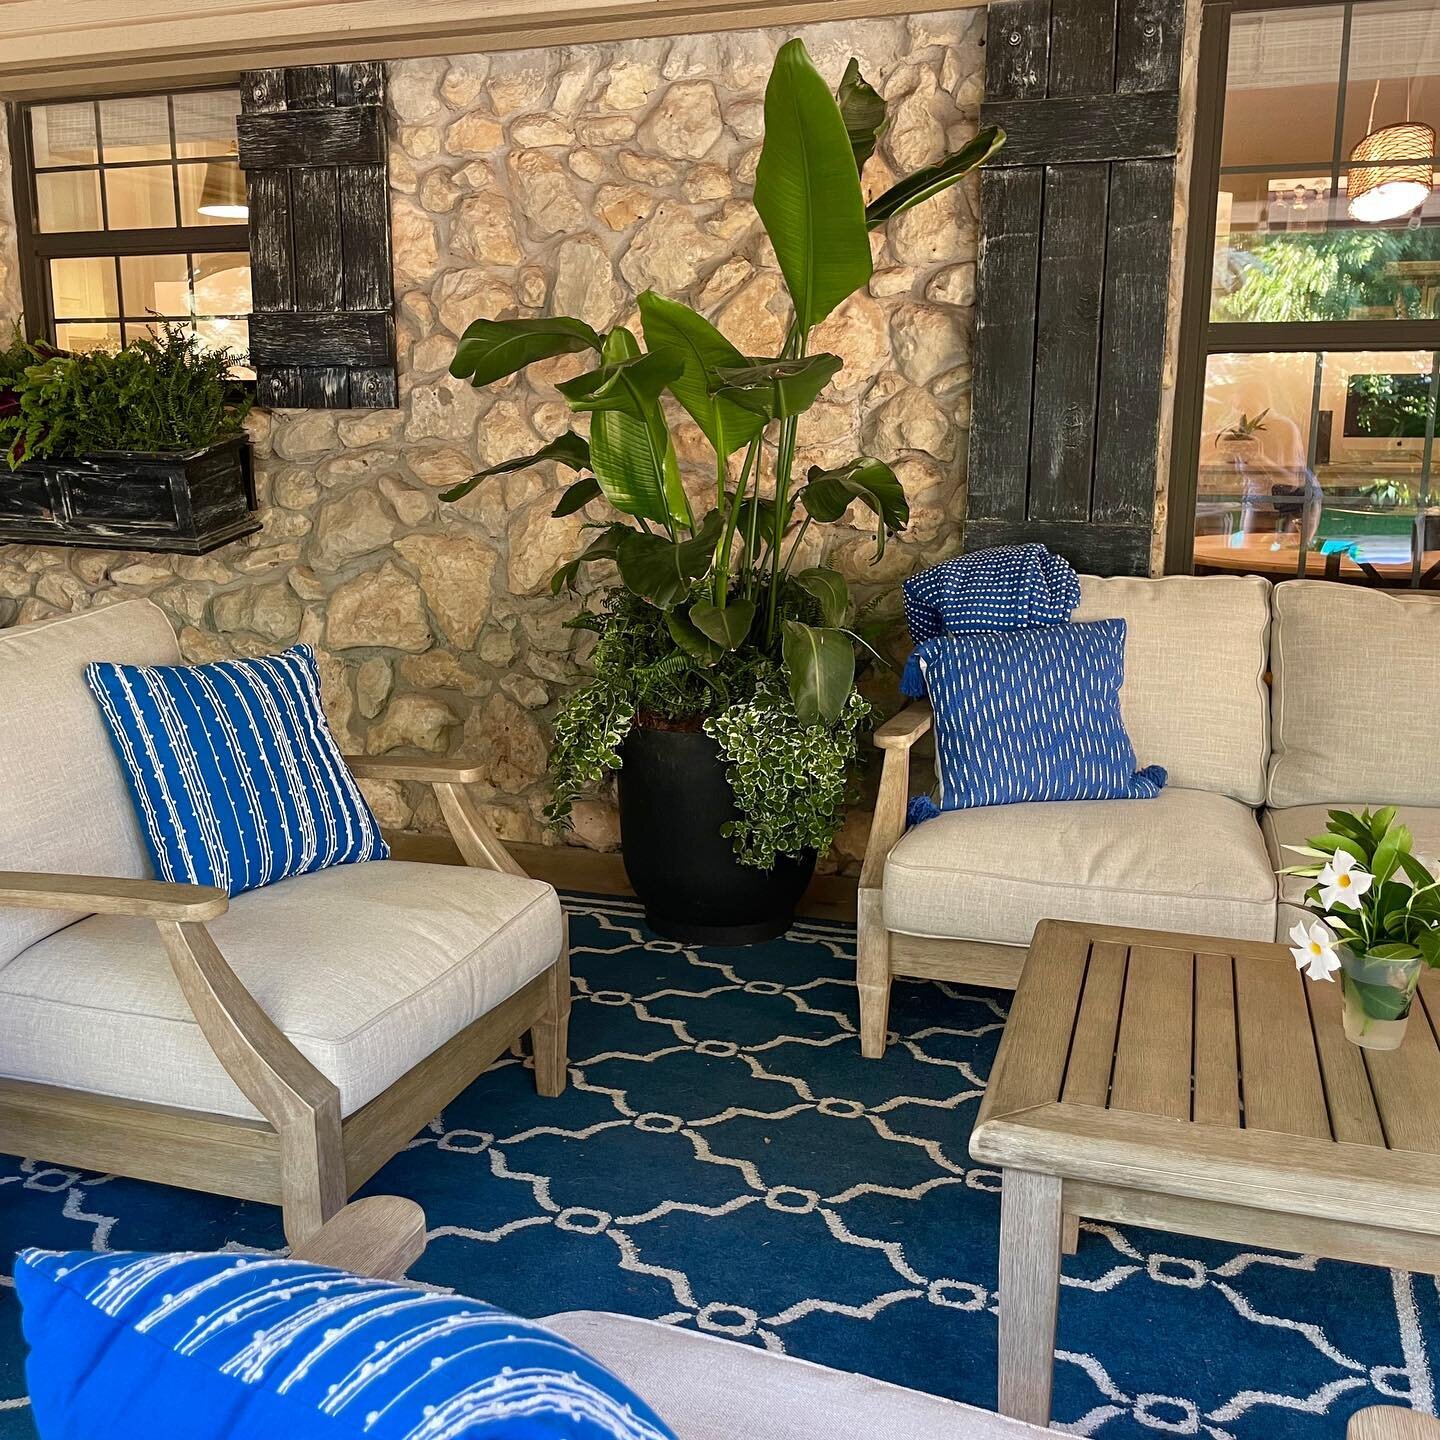 We have a crush on the Florencia style planter by @tierraverdeplanters. We love the large scale - it is 20&rdquo; wide at the top and 22&rdquo; tall. Elizabeth needed something large on her covered back patio and this filled the space so nicely. As a